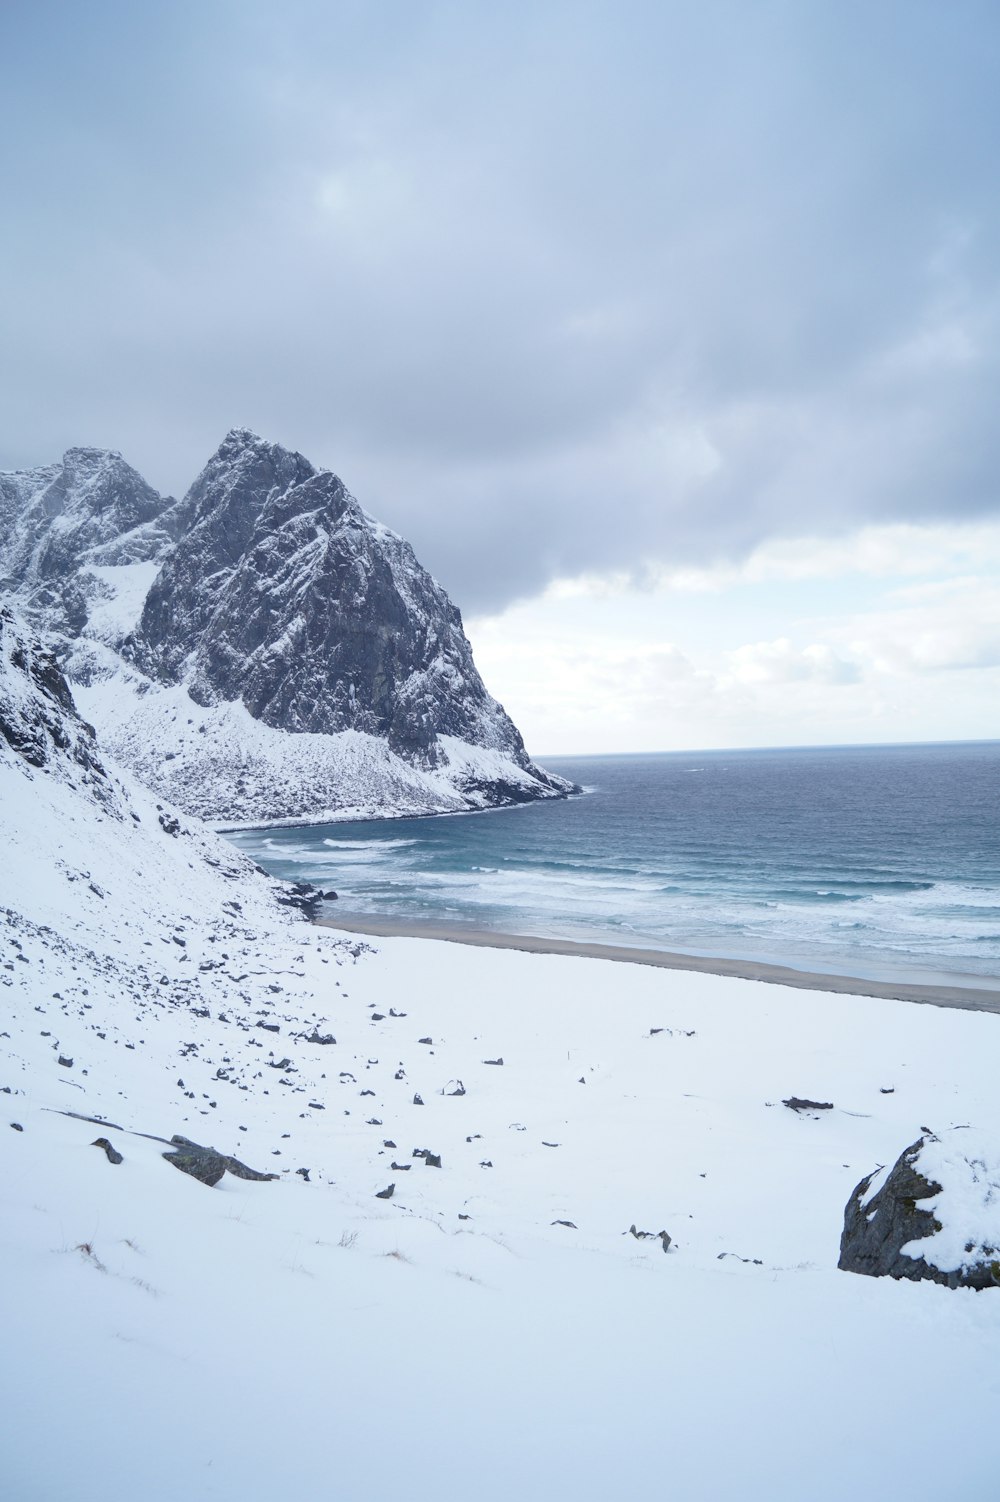 snow covered mountains on shore under gray sky